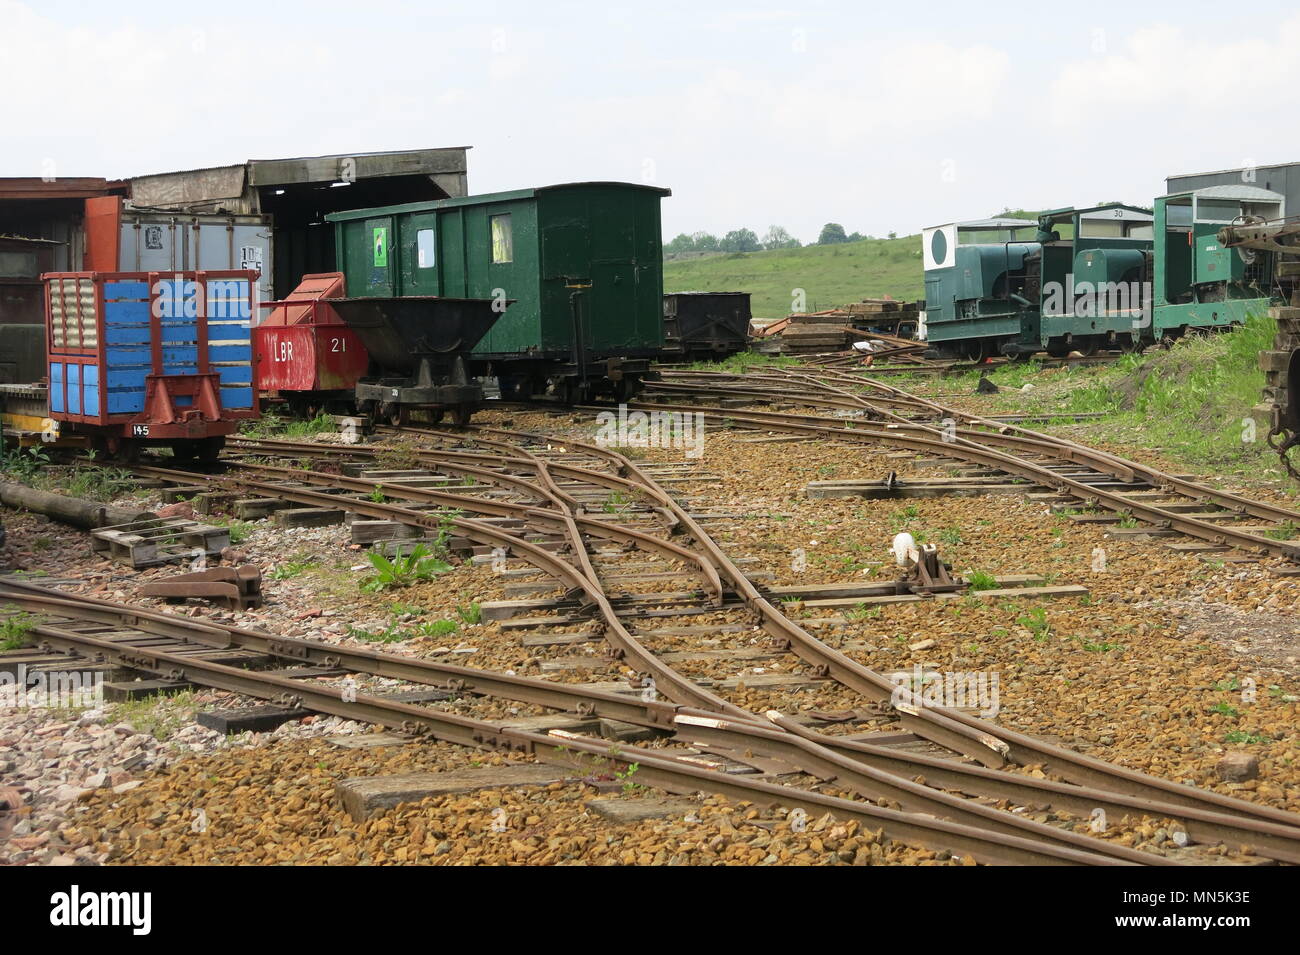 Leighton Buzzard Railway's Stonehenge Trail, with the working museum of wagons and diggers to illustrate the industrial heritage of quarried sand. Stock Photo